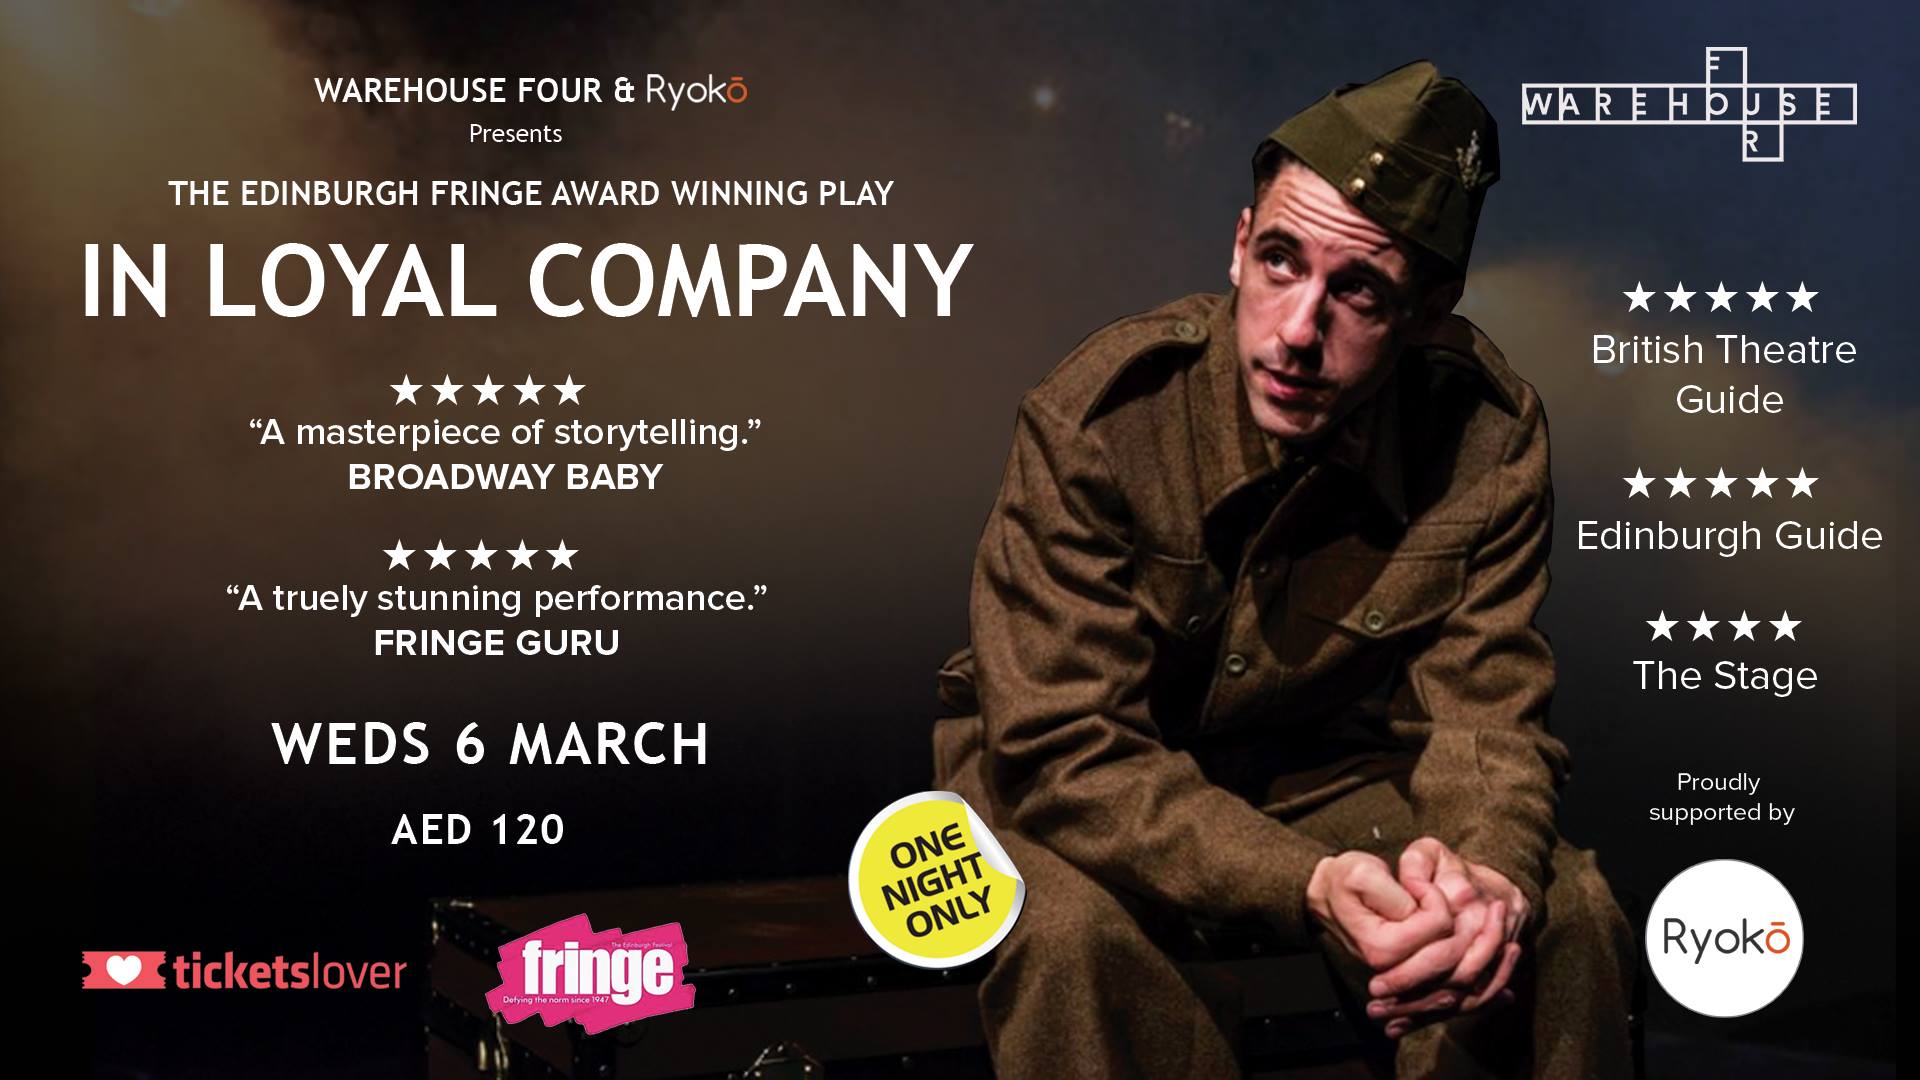 In Loyal Company play at Warehouse Four - Coming Soon in UAE